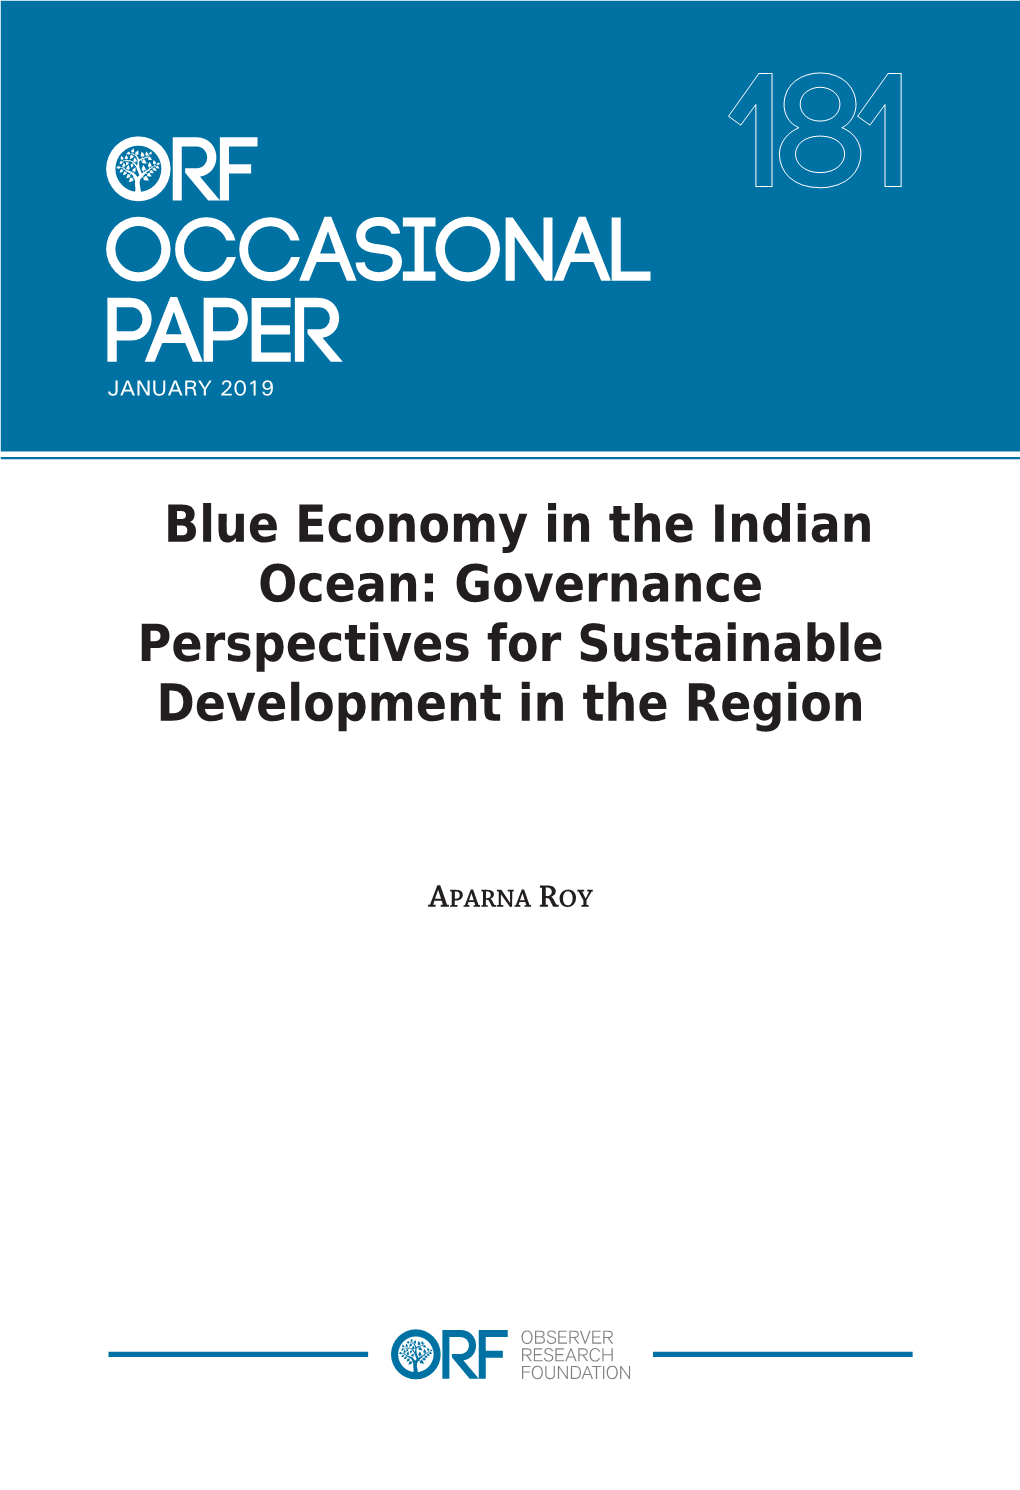 Blue Economy in the Indian Ocean: Governance Perspectives for Sustainable Development in the Region